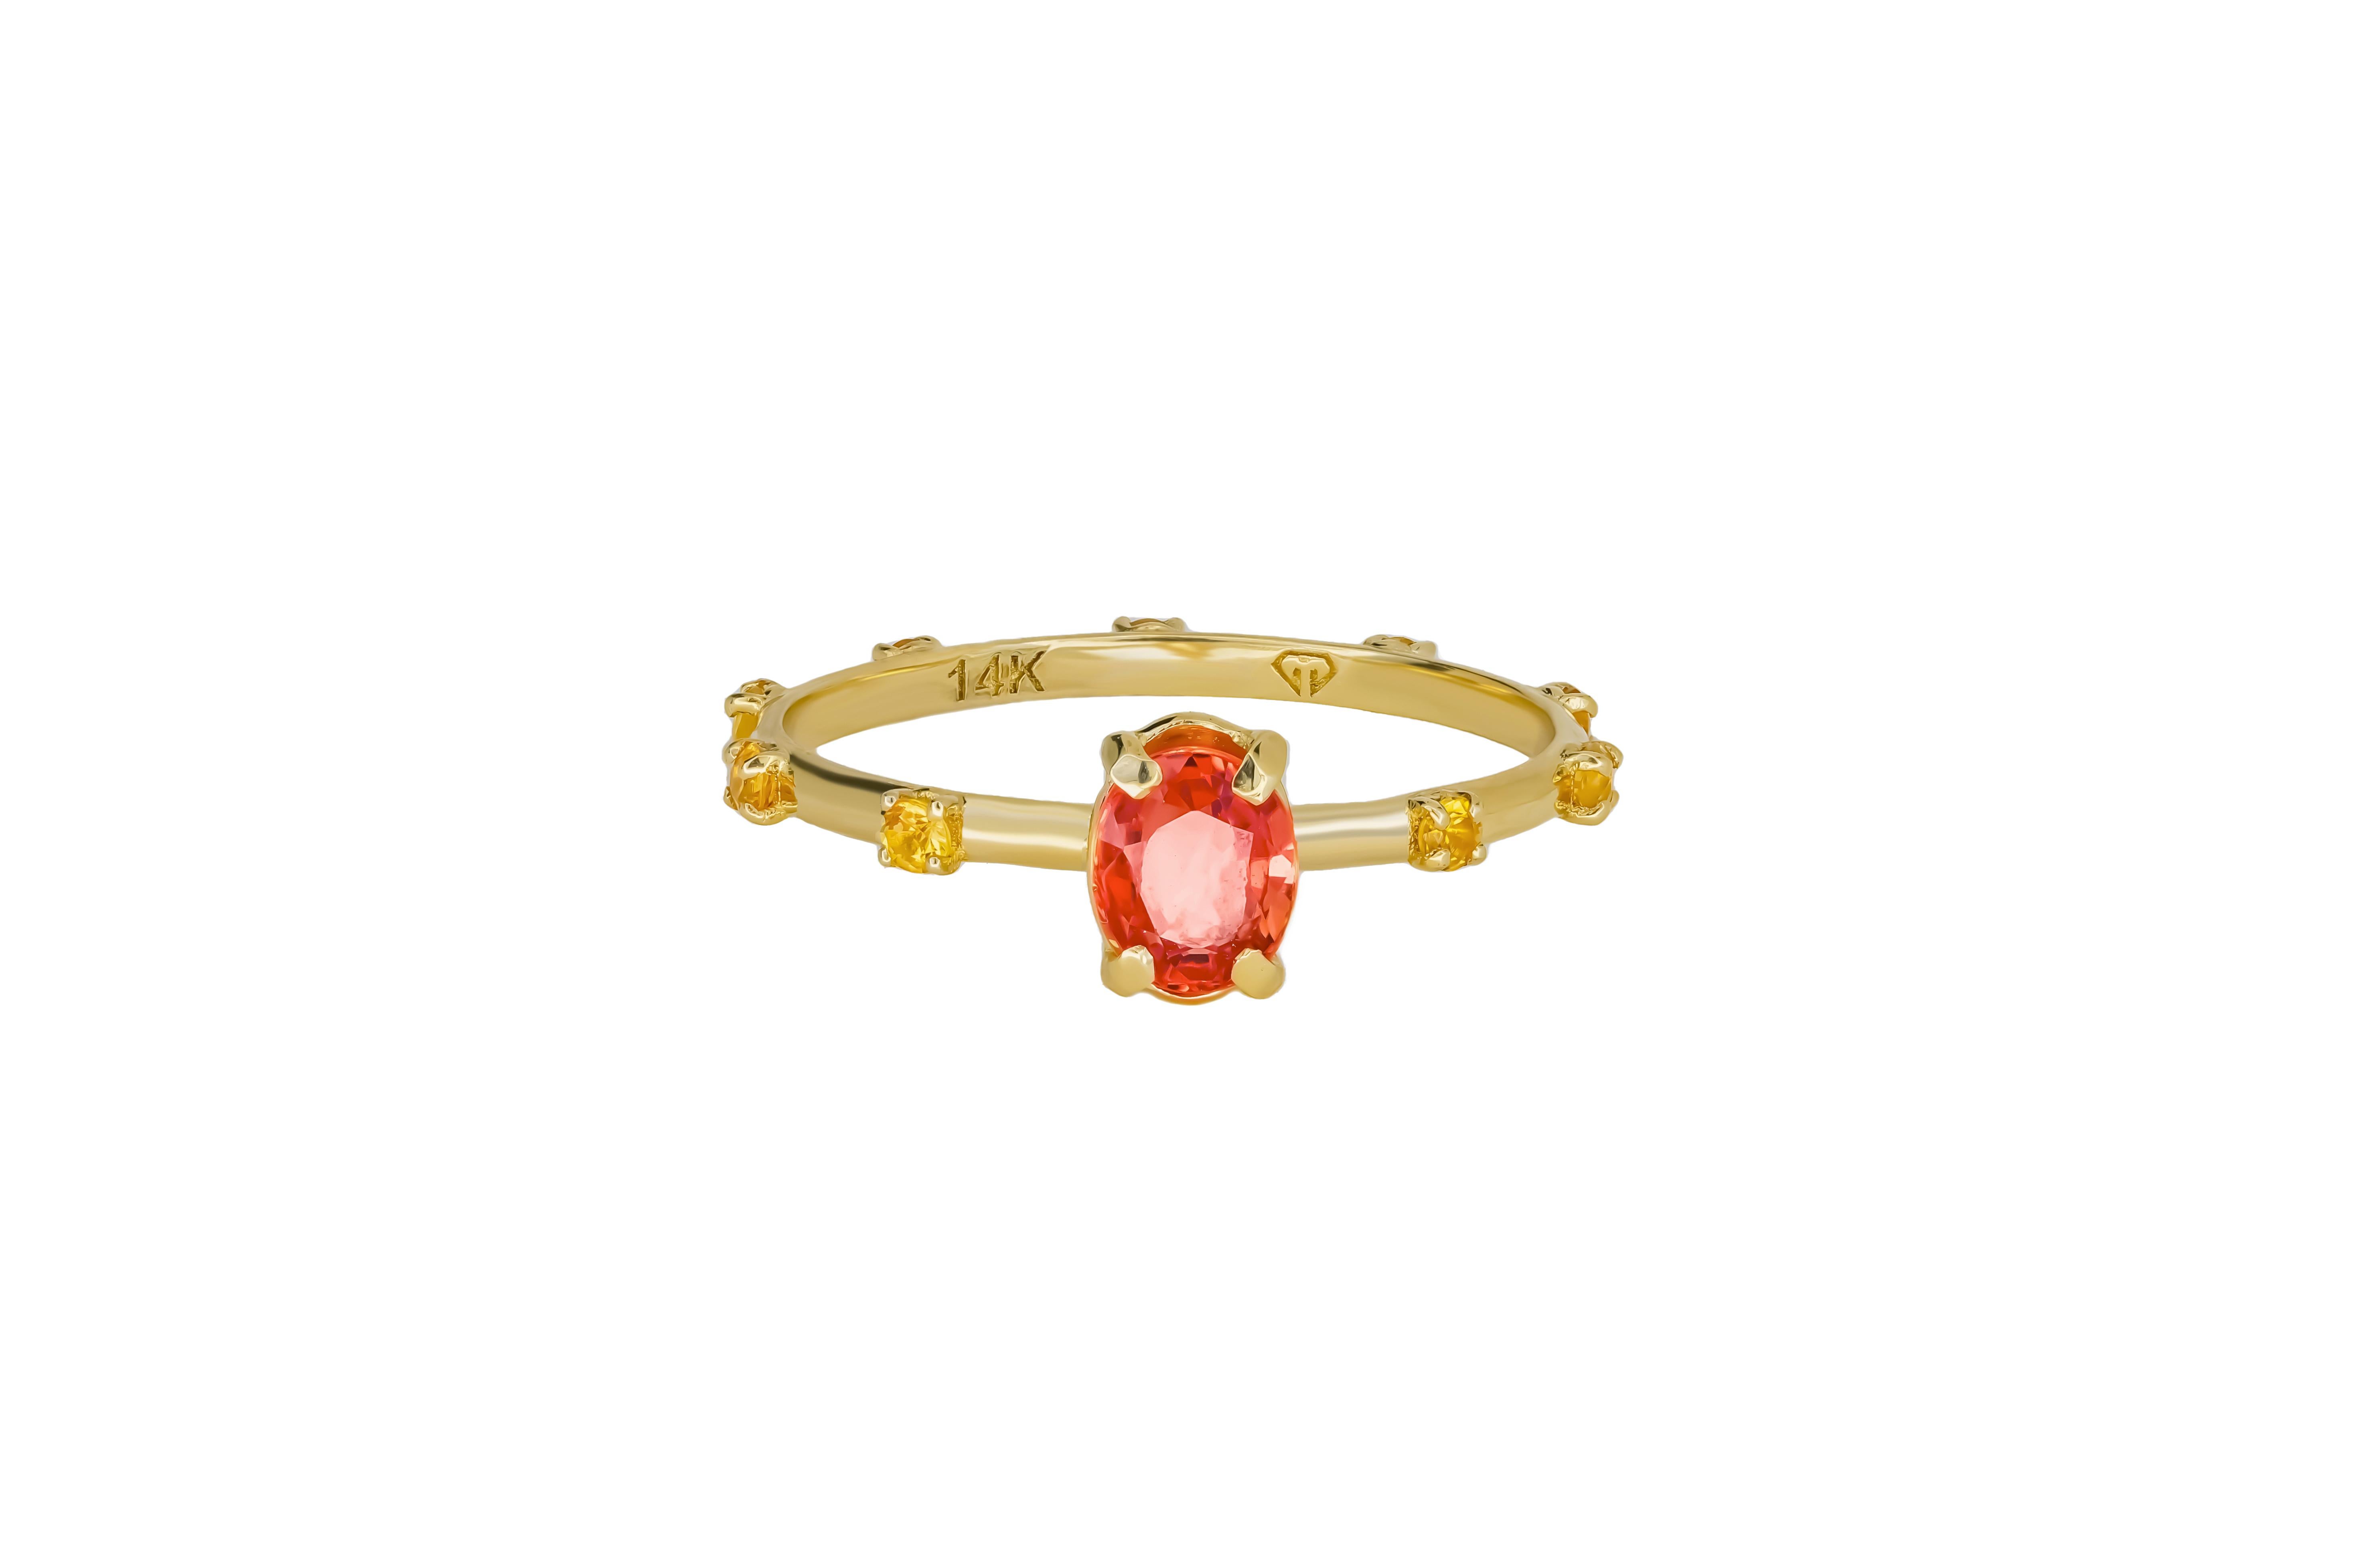 For Sale:  Peach color gemstone 14k gold ring. 3